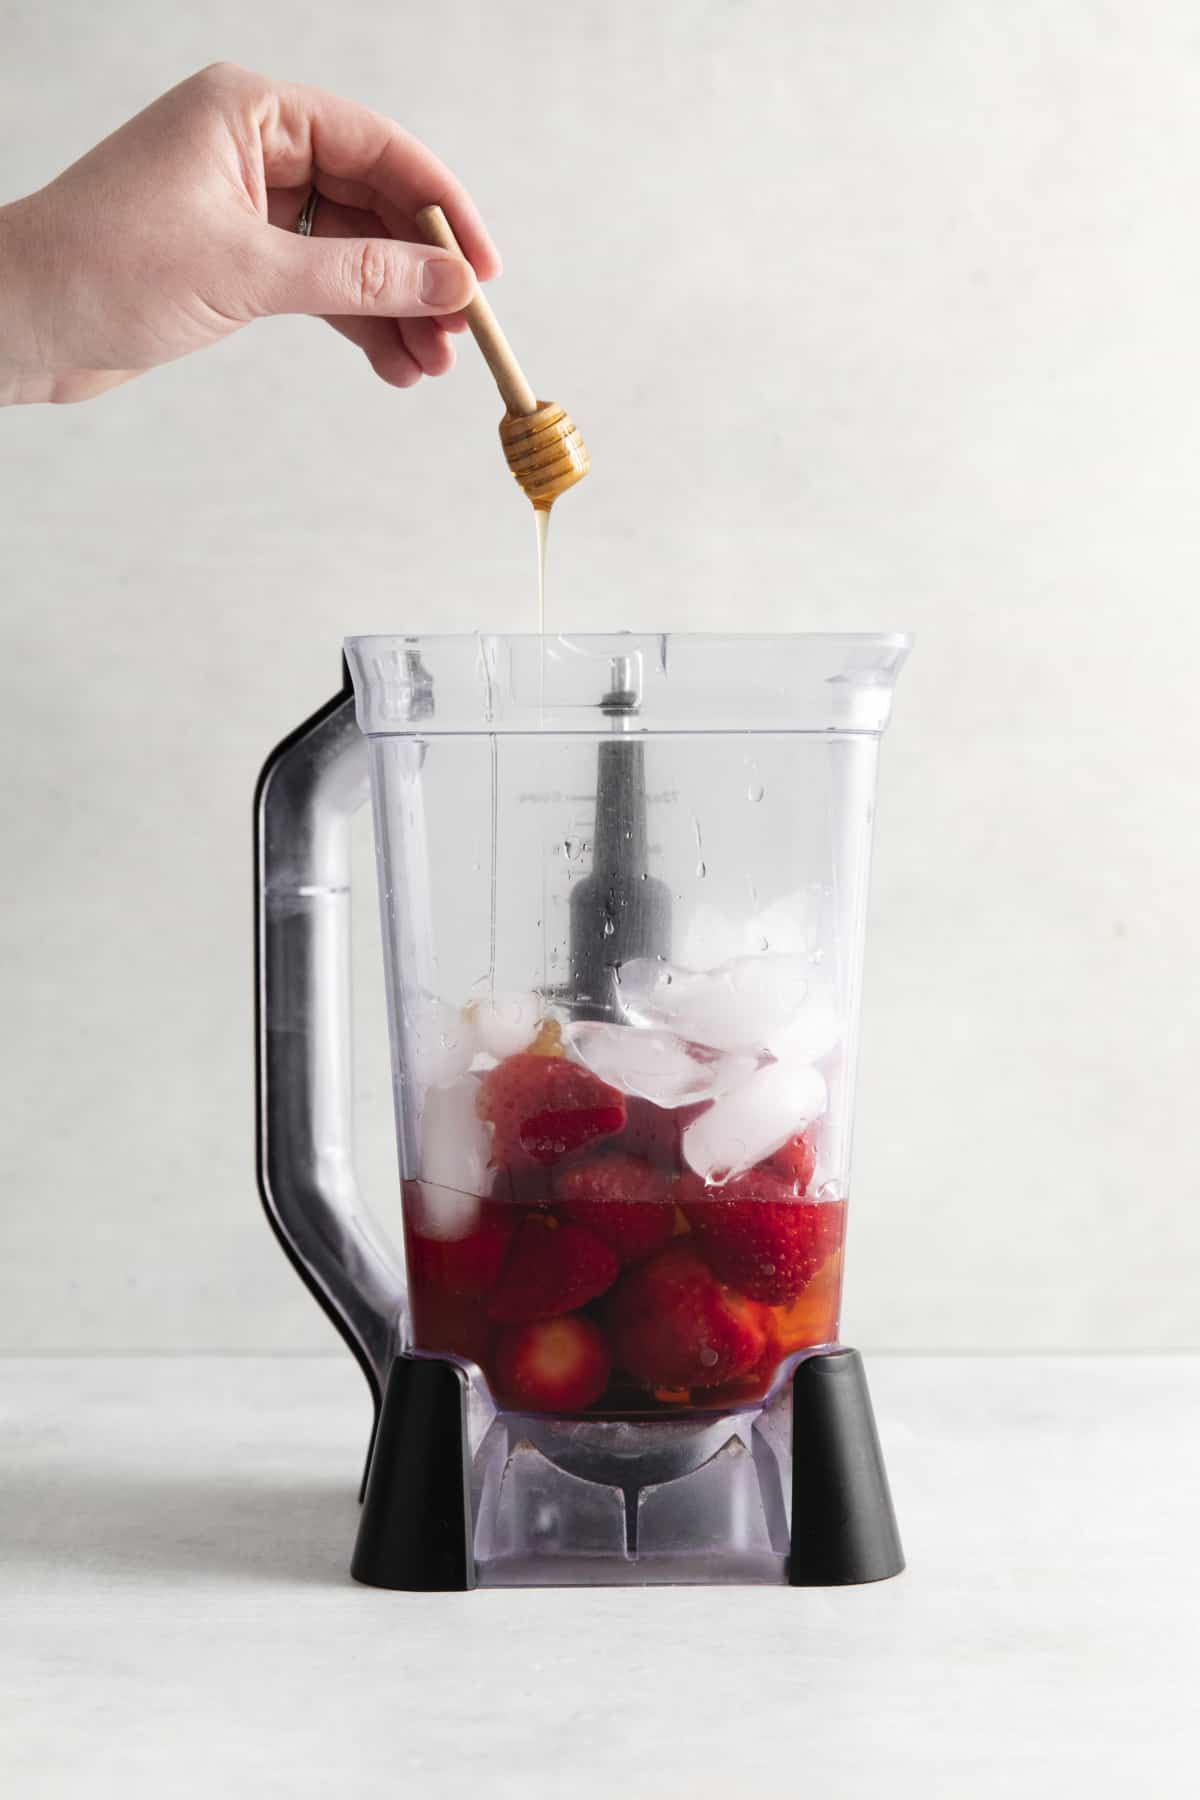 honey being added to a blender with strawberries and ice.